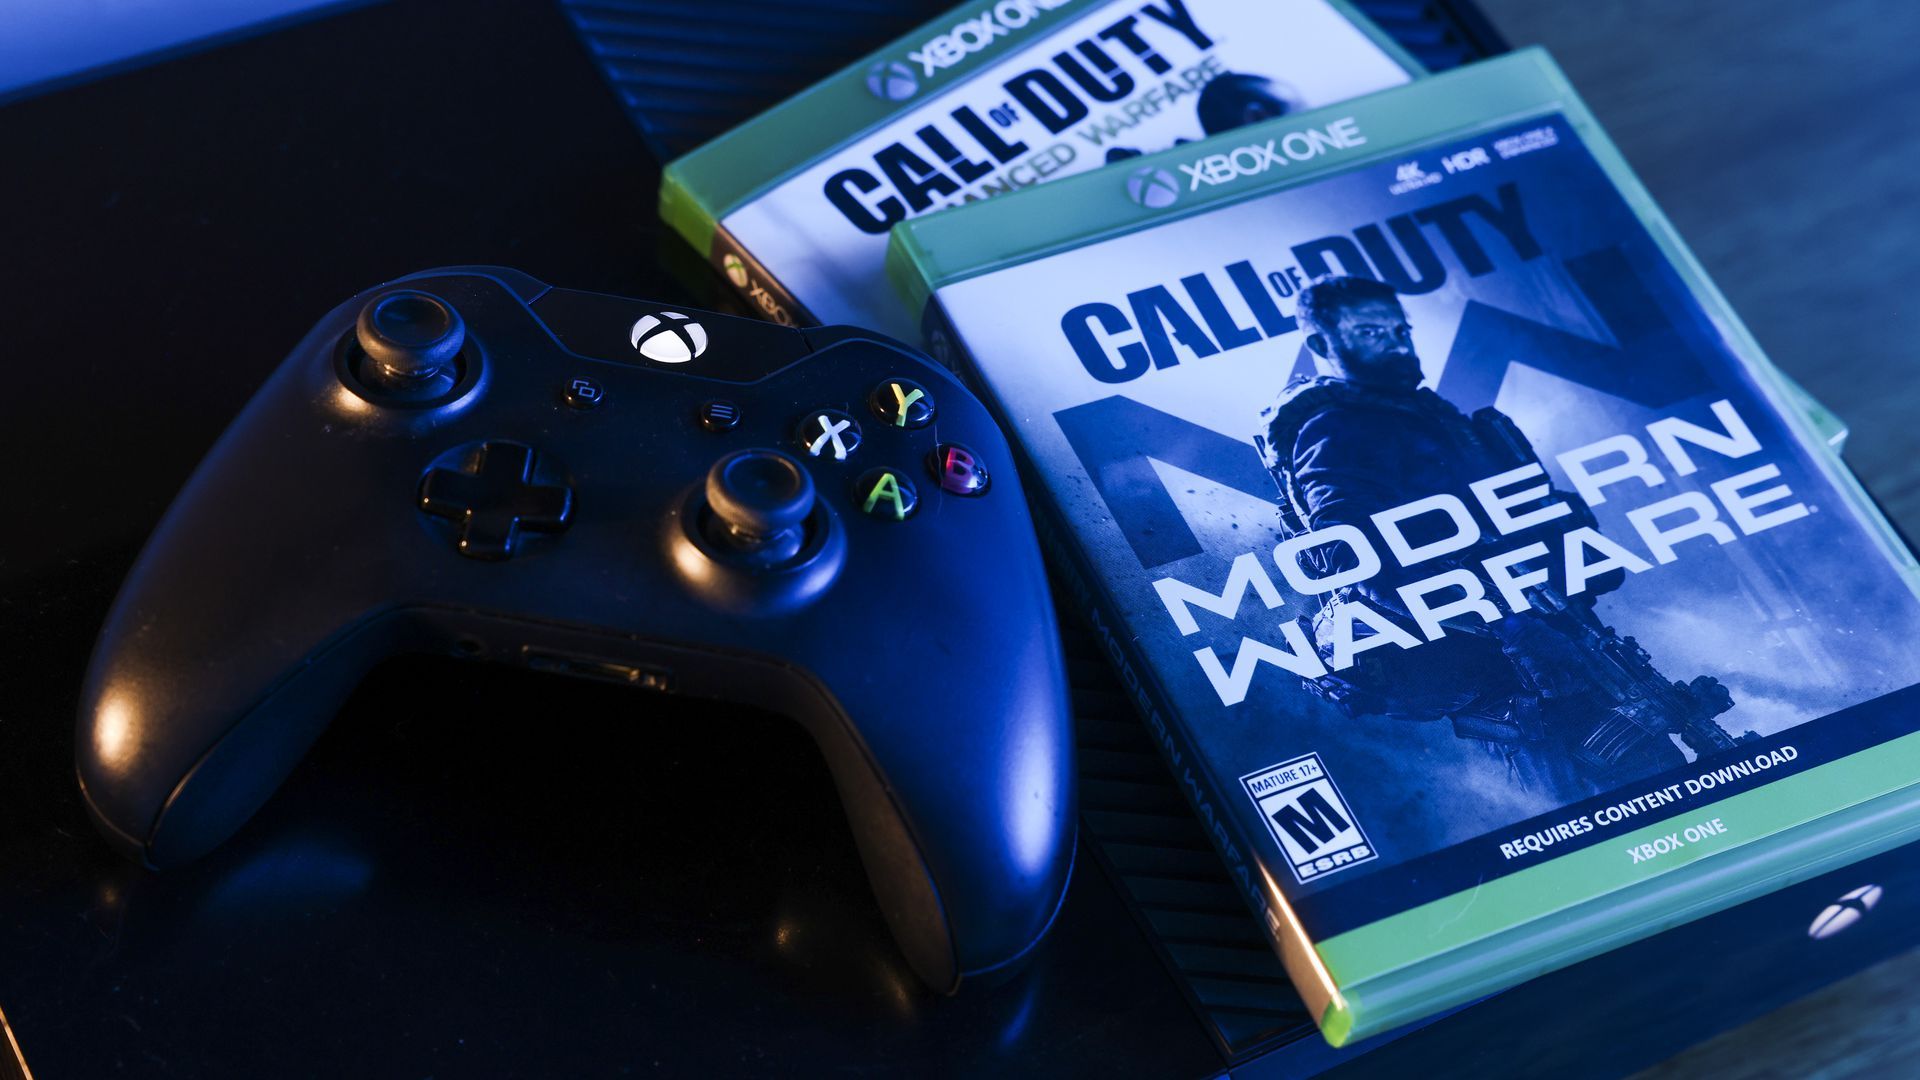 An image of two Call of Duty games next to an Xbox controller